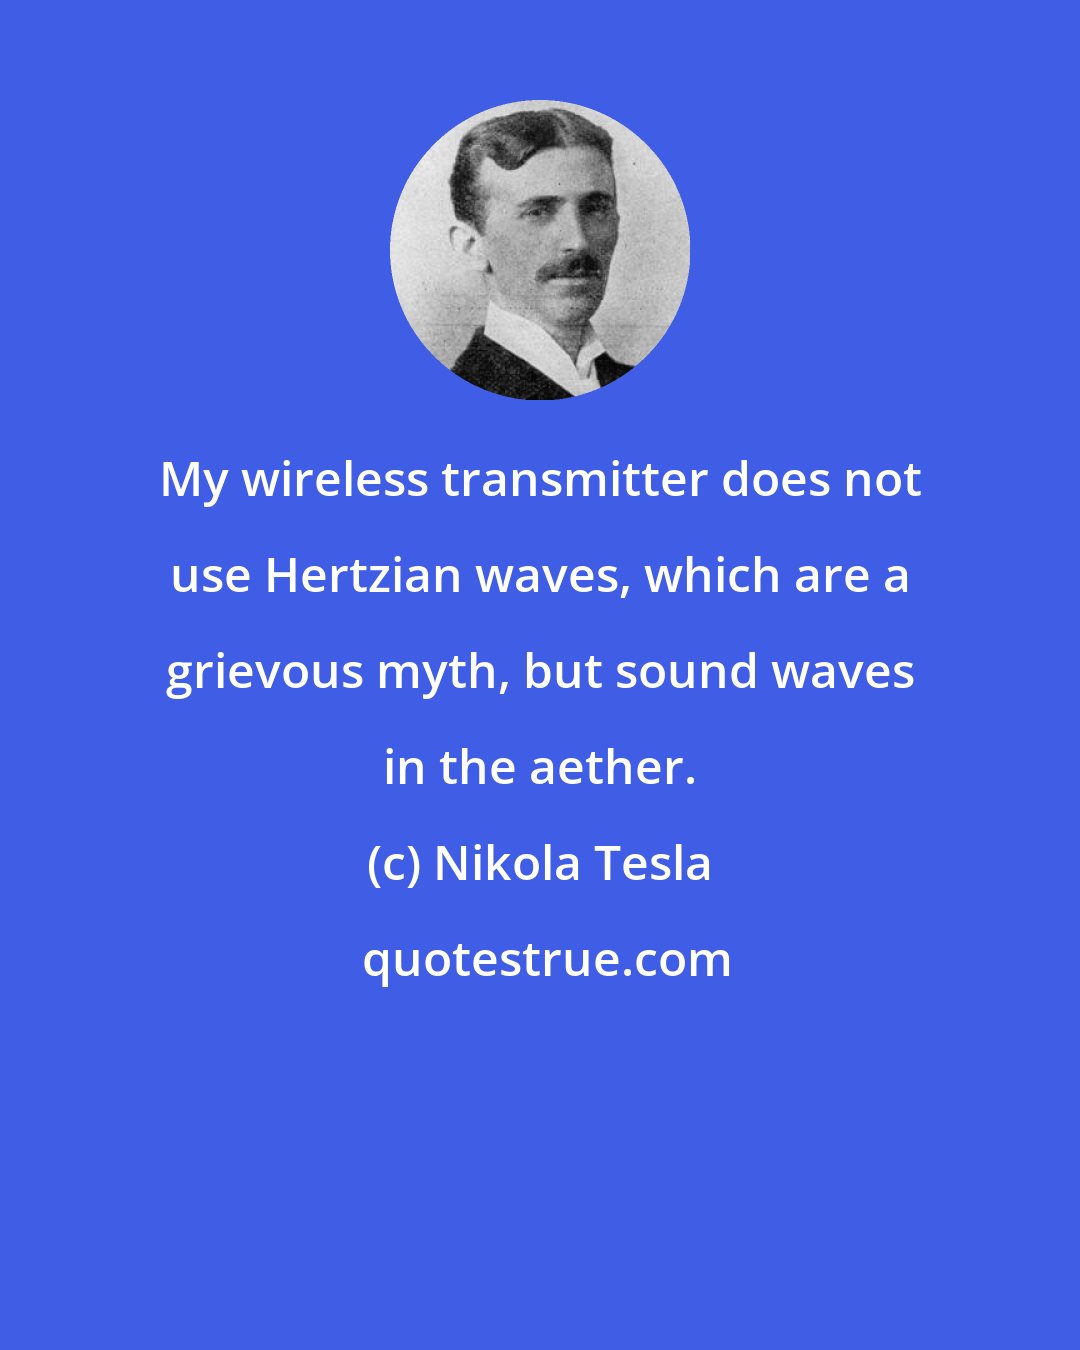 Nikola Tesla: My wireless transmitter does not use Hertzian waves, which are a grievous myth, but sound waves in the aether.